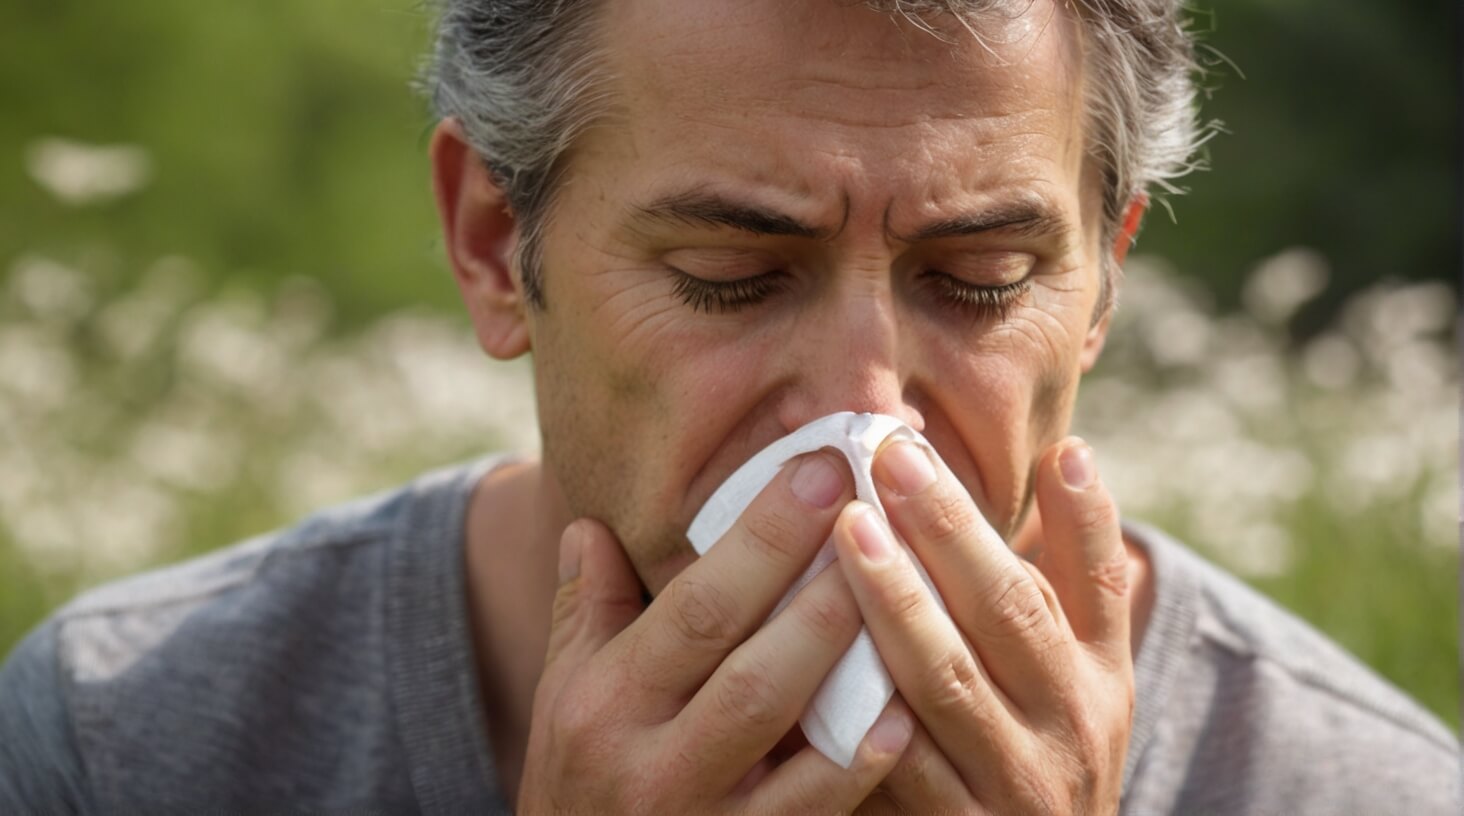 Close-up image of a person sneezing due to allergies